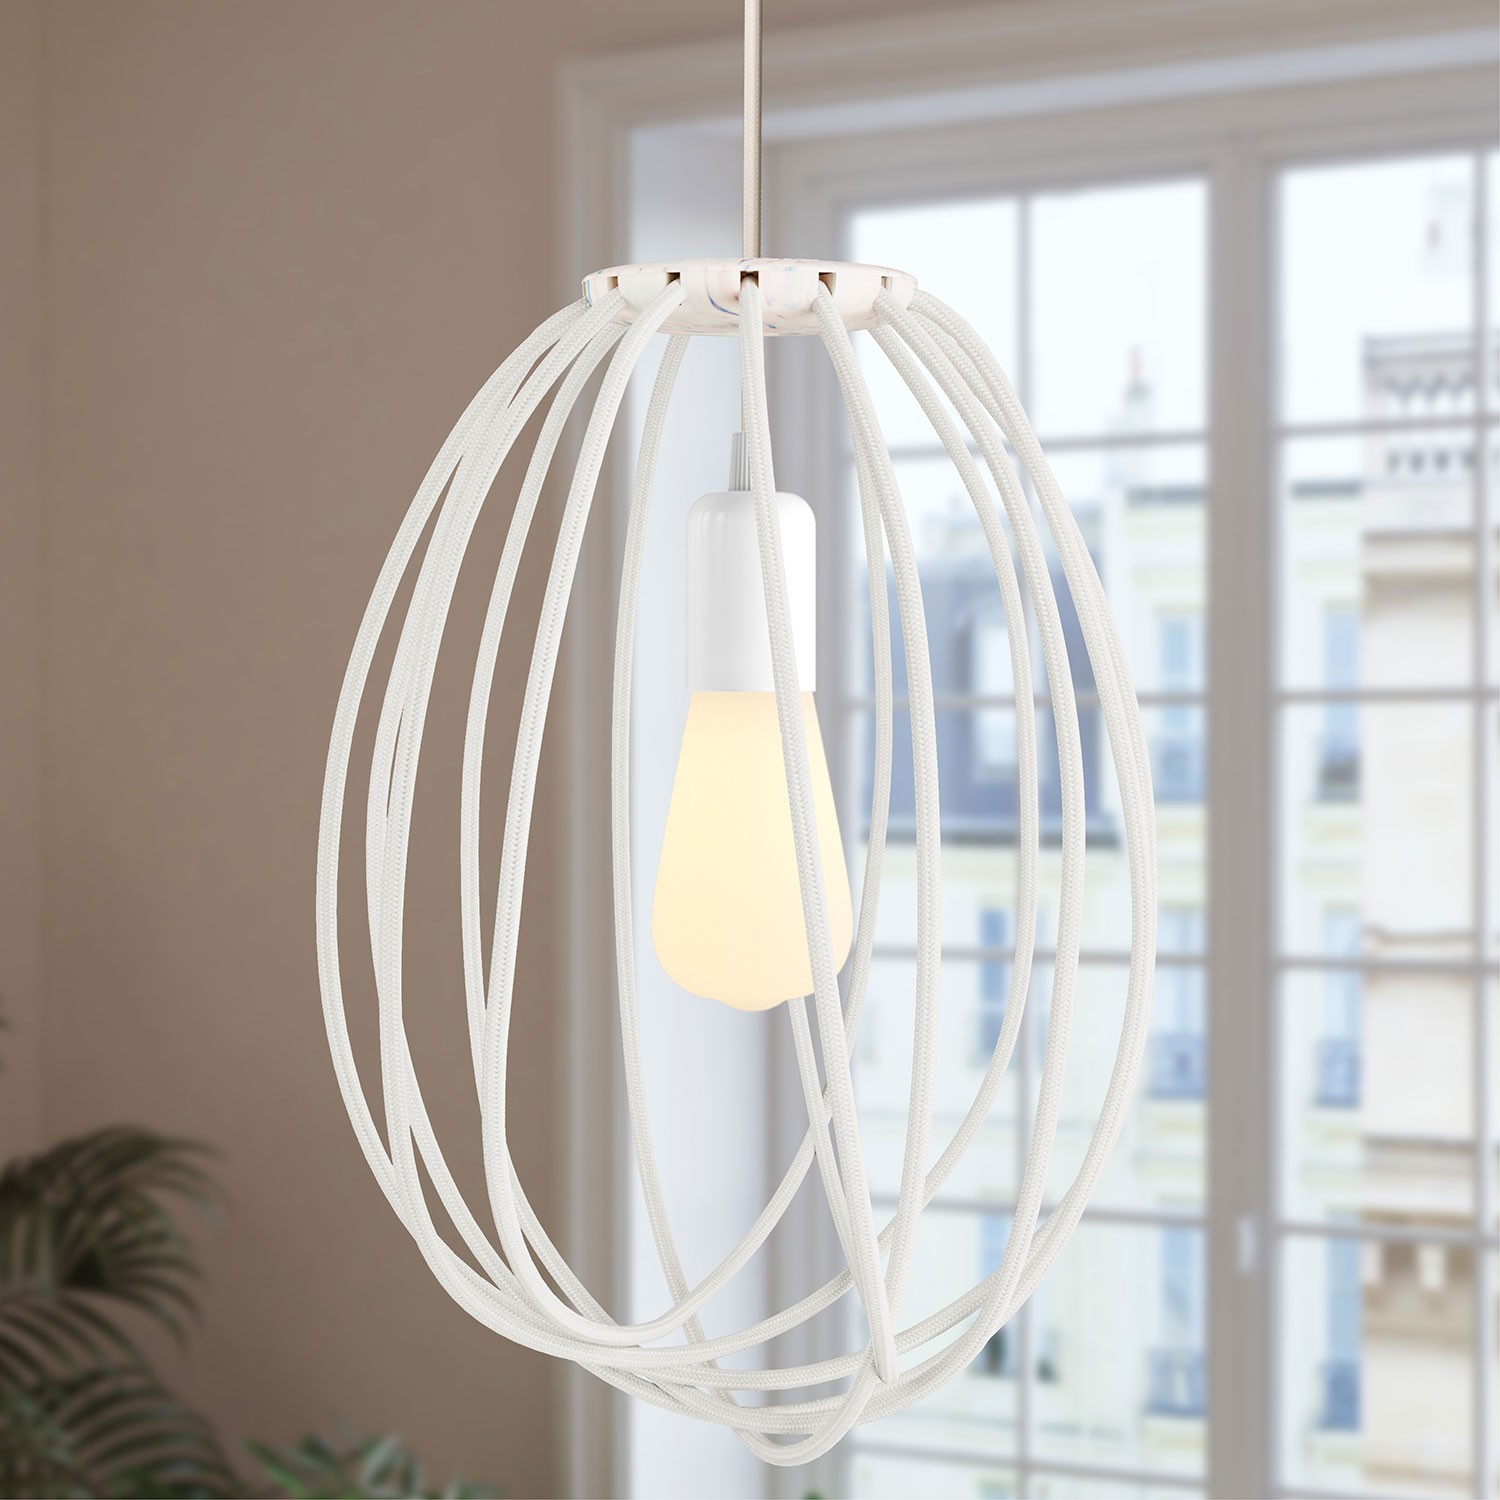 Kit Cablò, support in recycled plastic to create lampshades